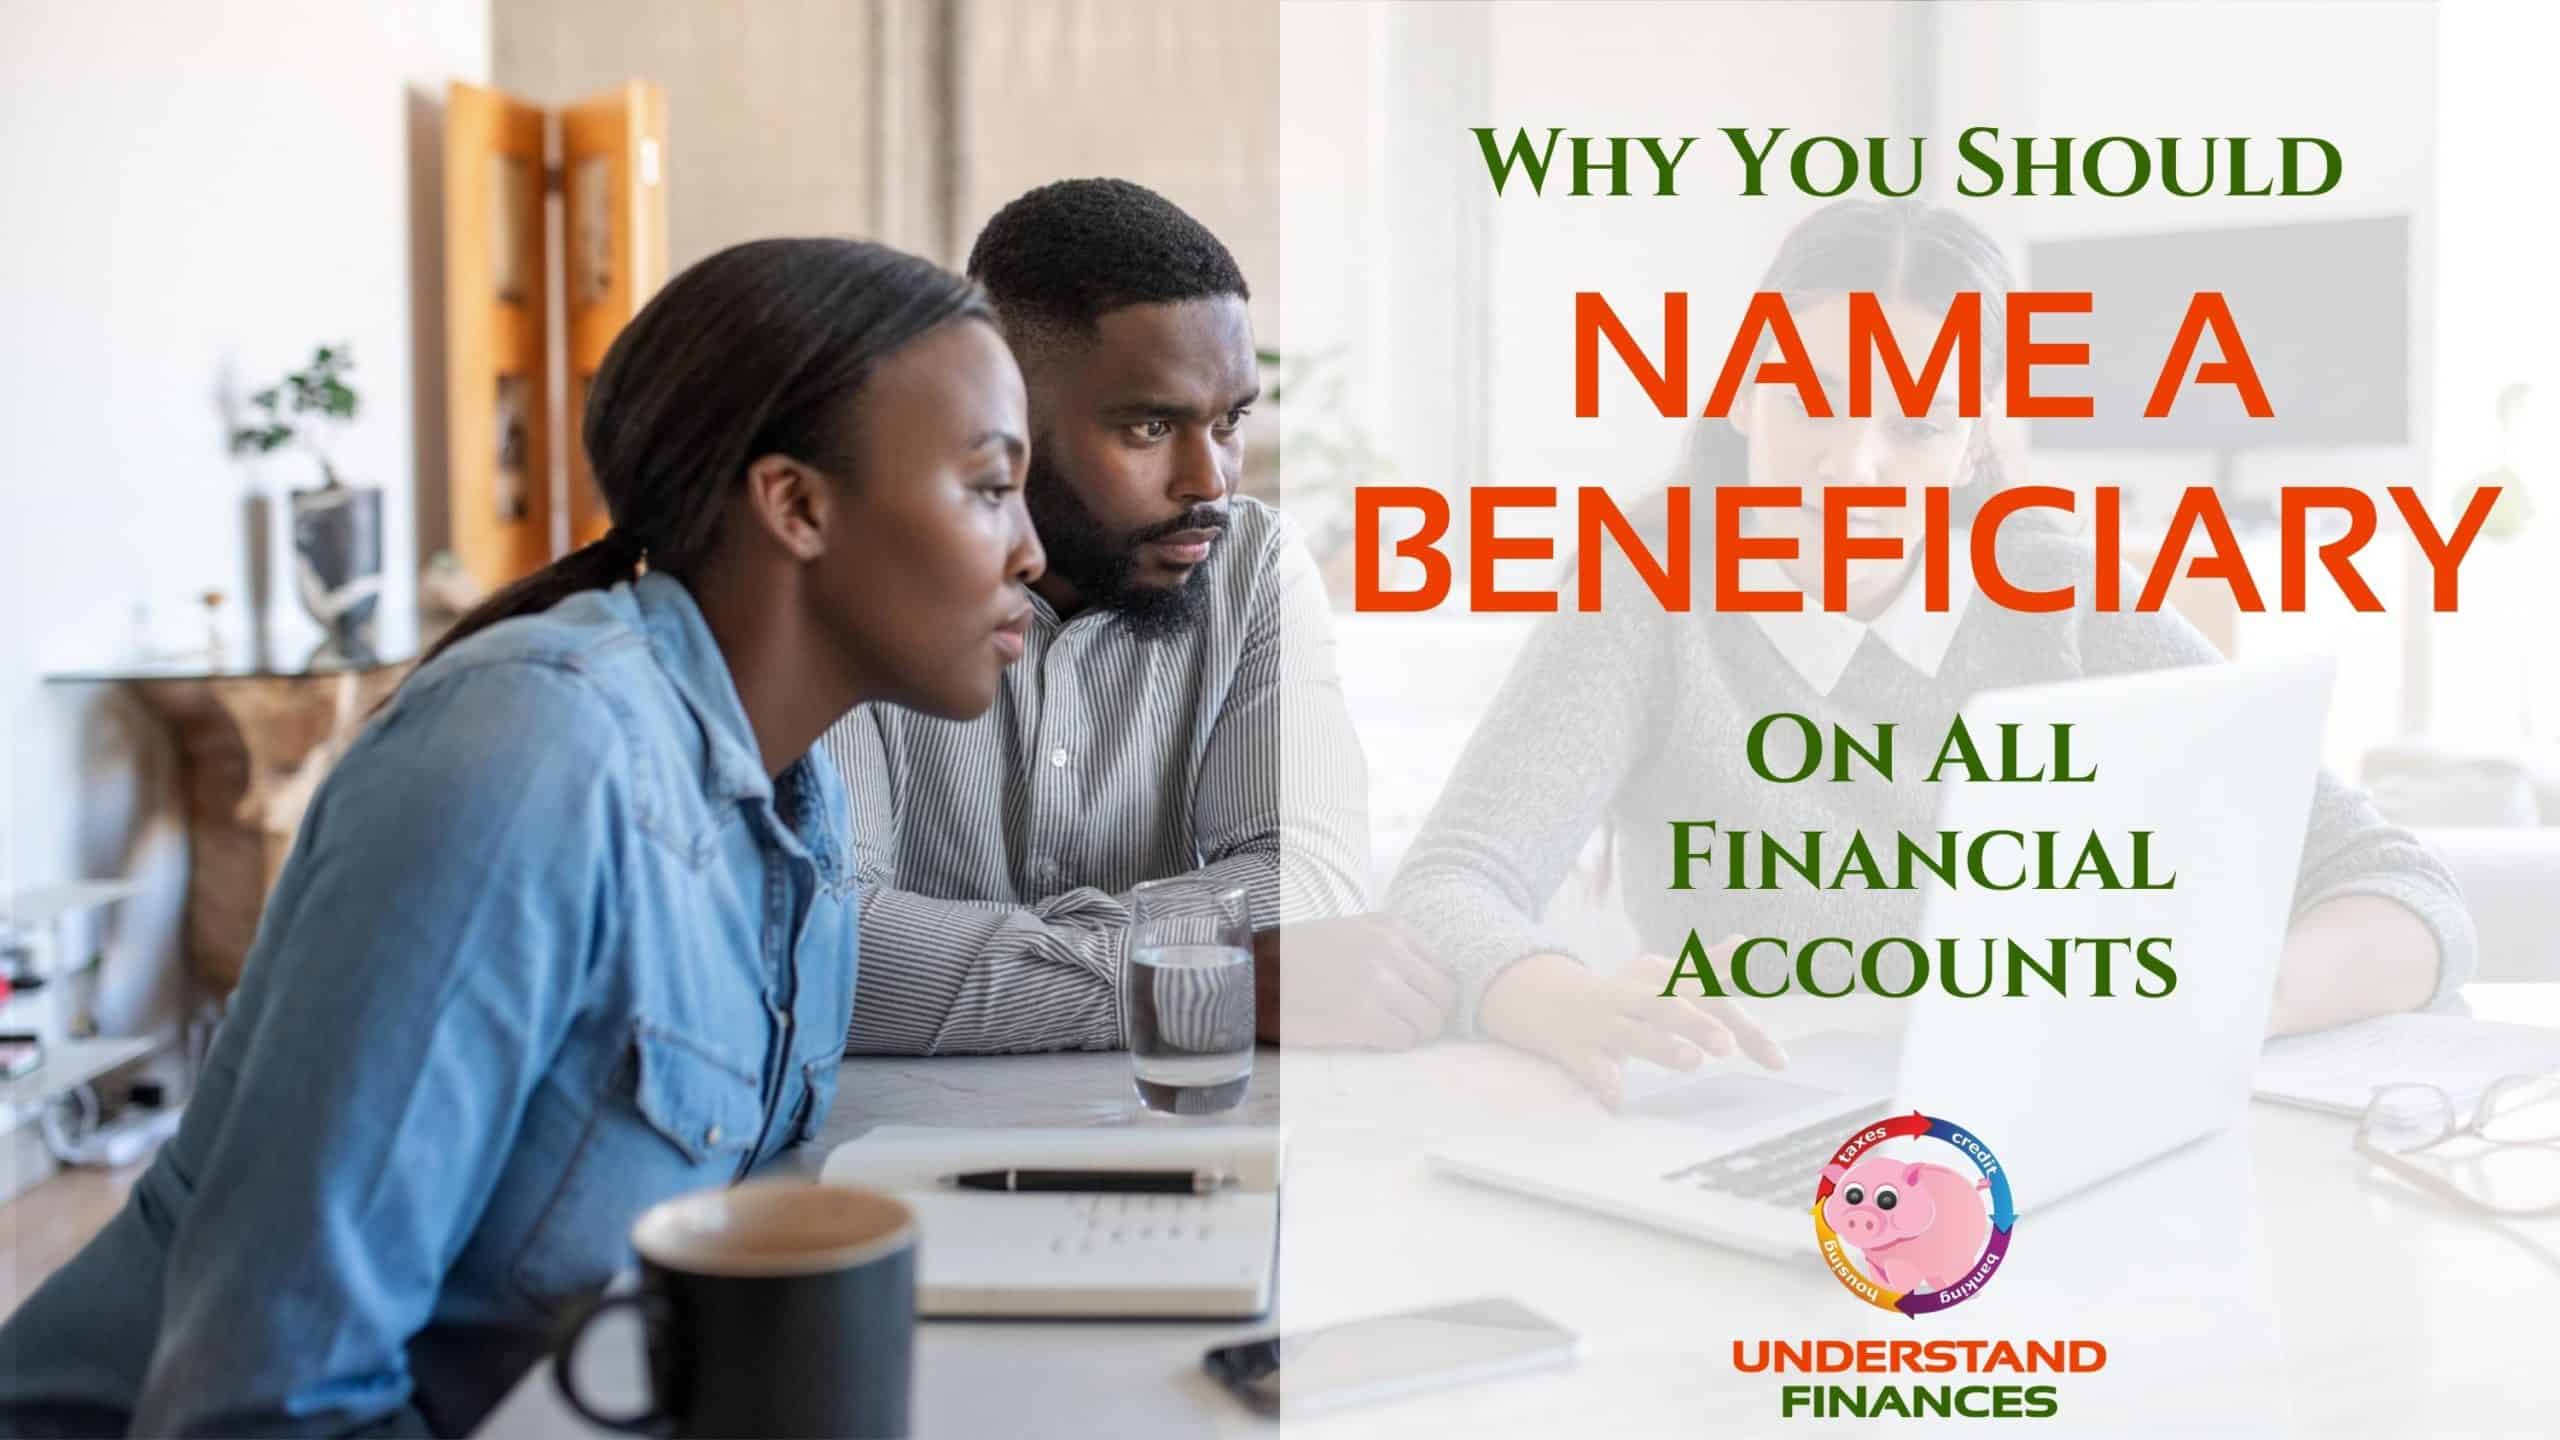 Why You Should Name A Beneficiary On All Financial Accounts